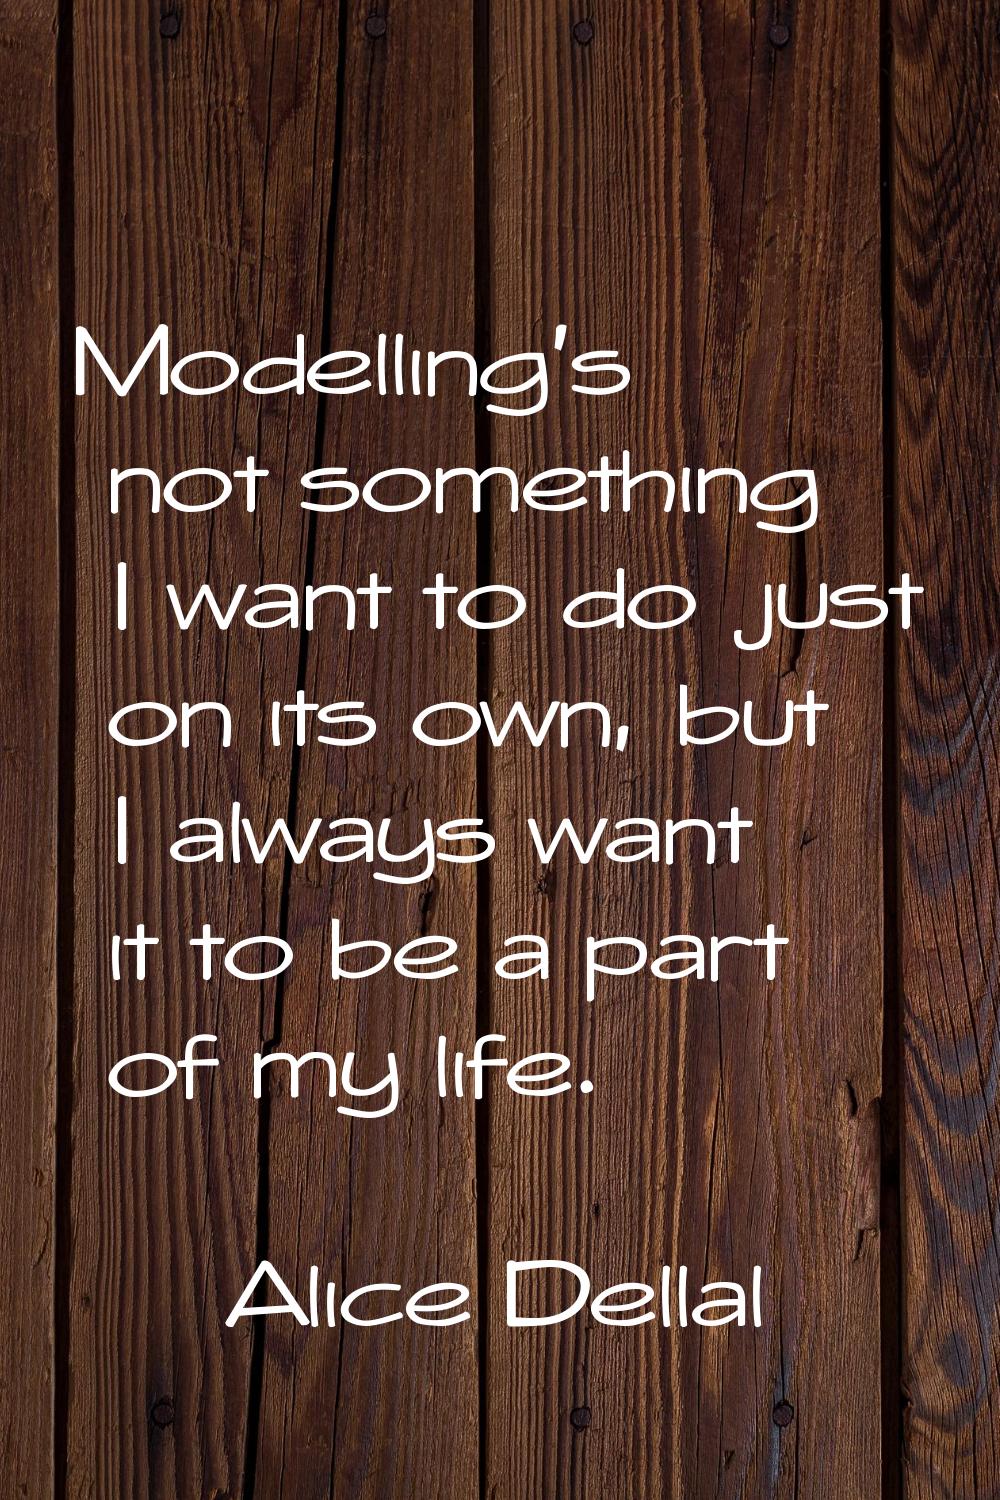 Modelling's not something I want to do just on its own, but I always want it to be a part of my lif